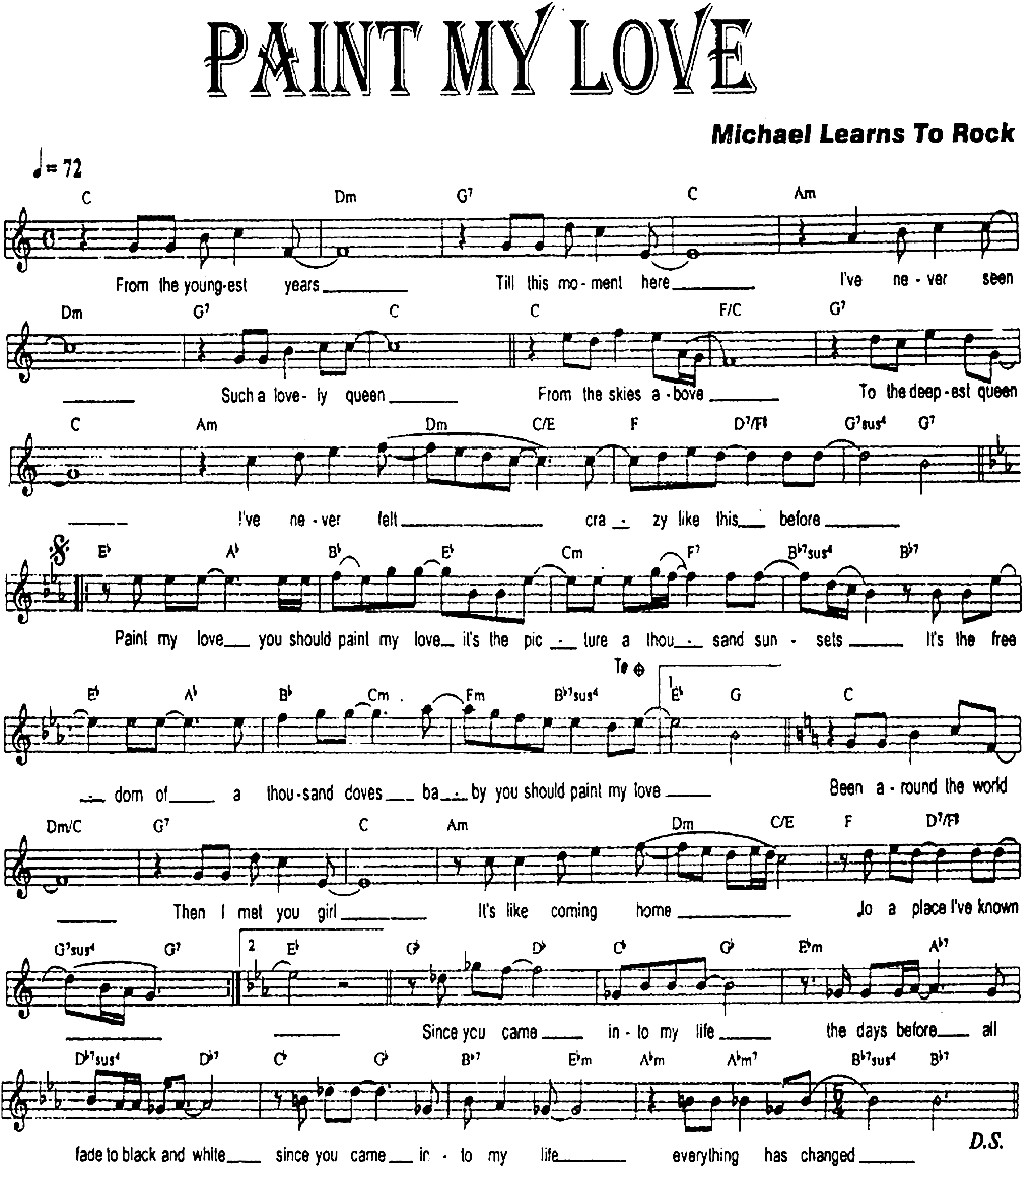 Paint my love sheet music notes 1